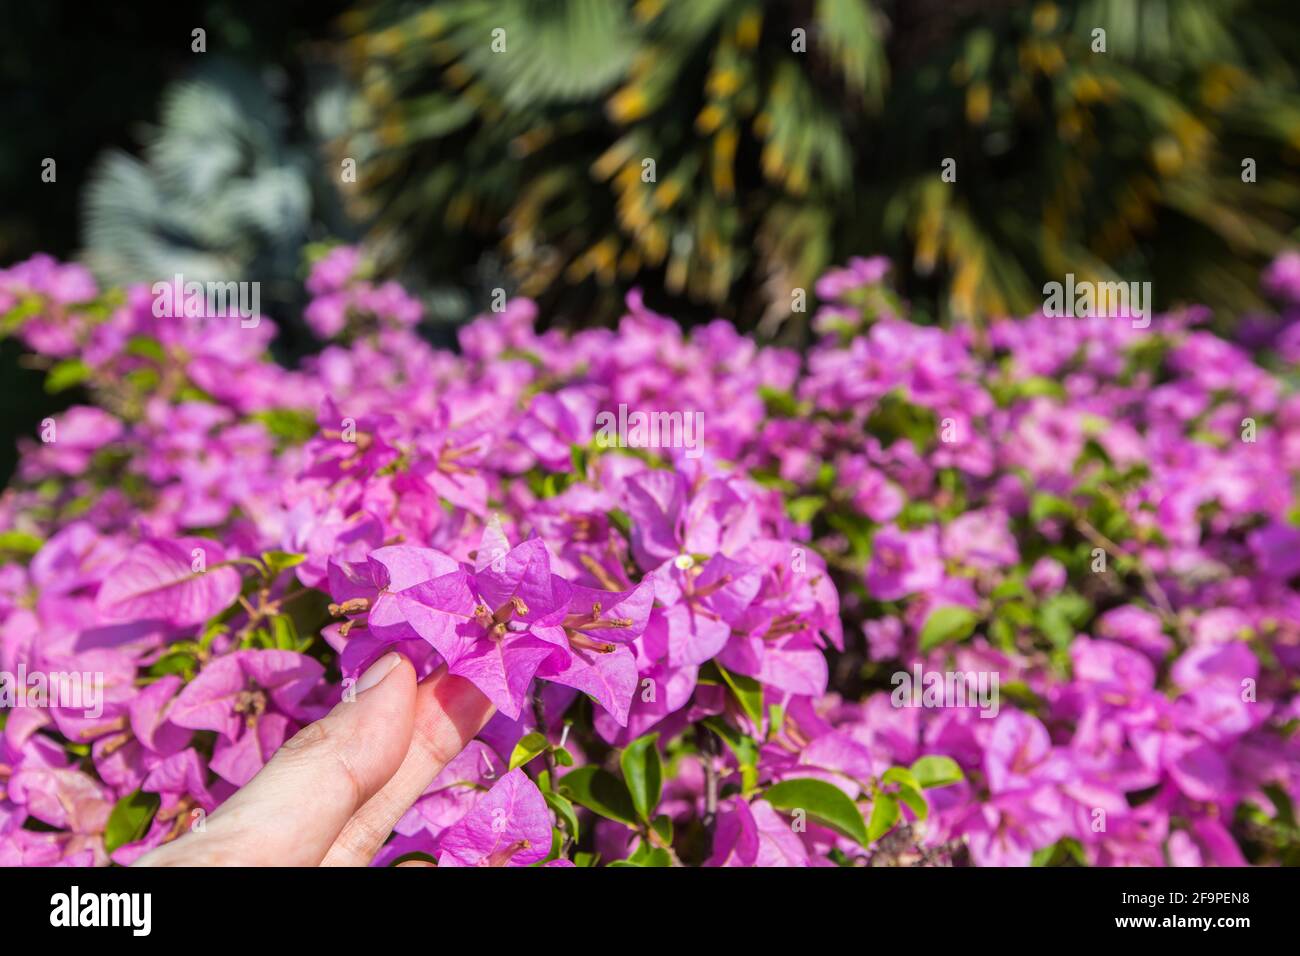 Close up of a finger touch and feel the bougainvillea plant at outdoor space setting. Stock Photo